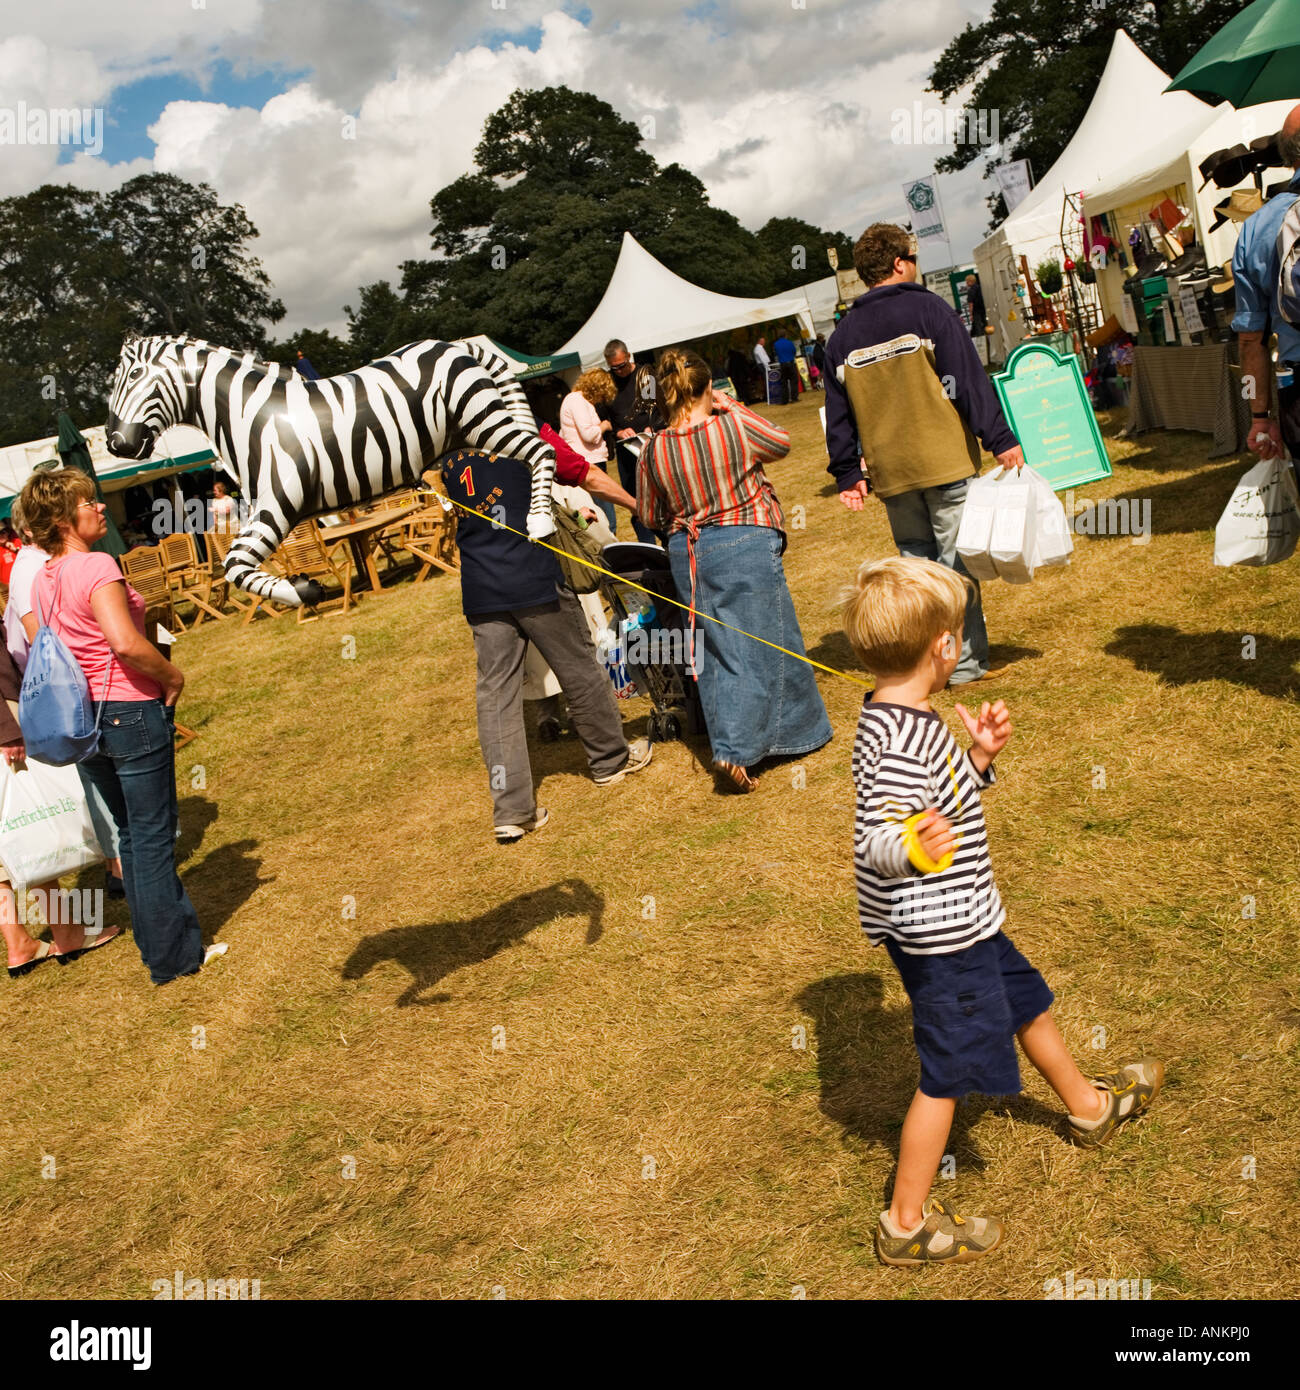 zebra balloon black and white stripe stripey t-shirt match quirky Hatfield Country Show England Stock Photo